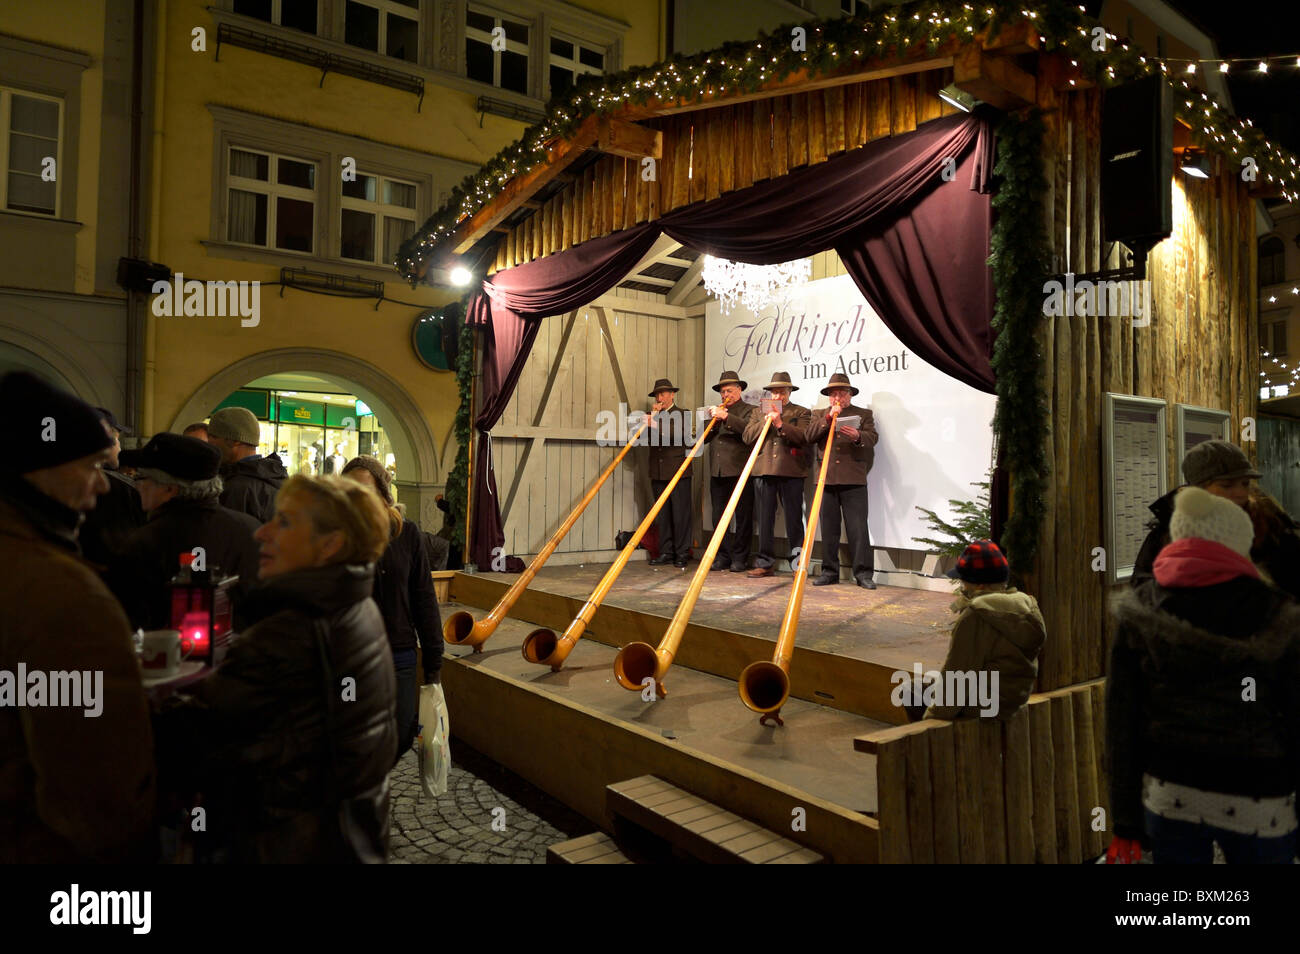 Welcome to the Christmas Market at Feldkirch, Austria AT Stock Photo